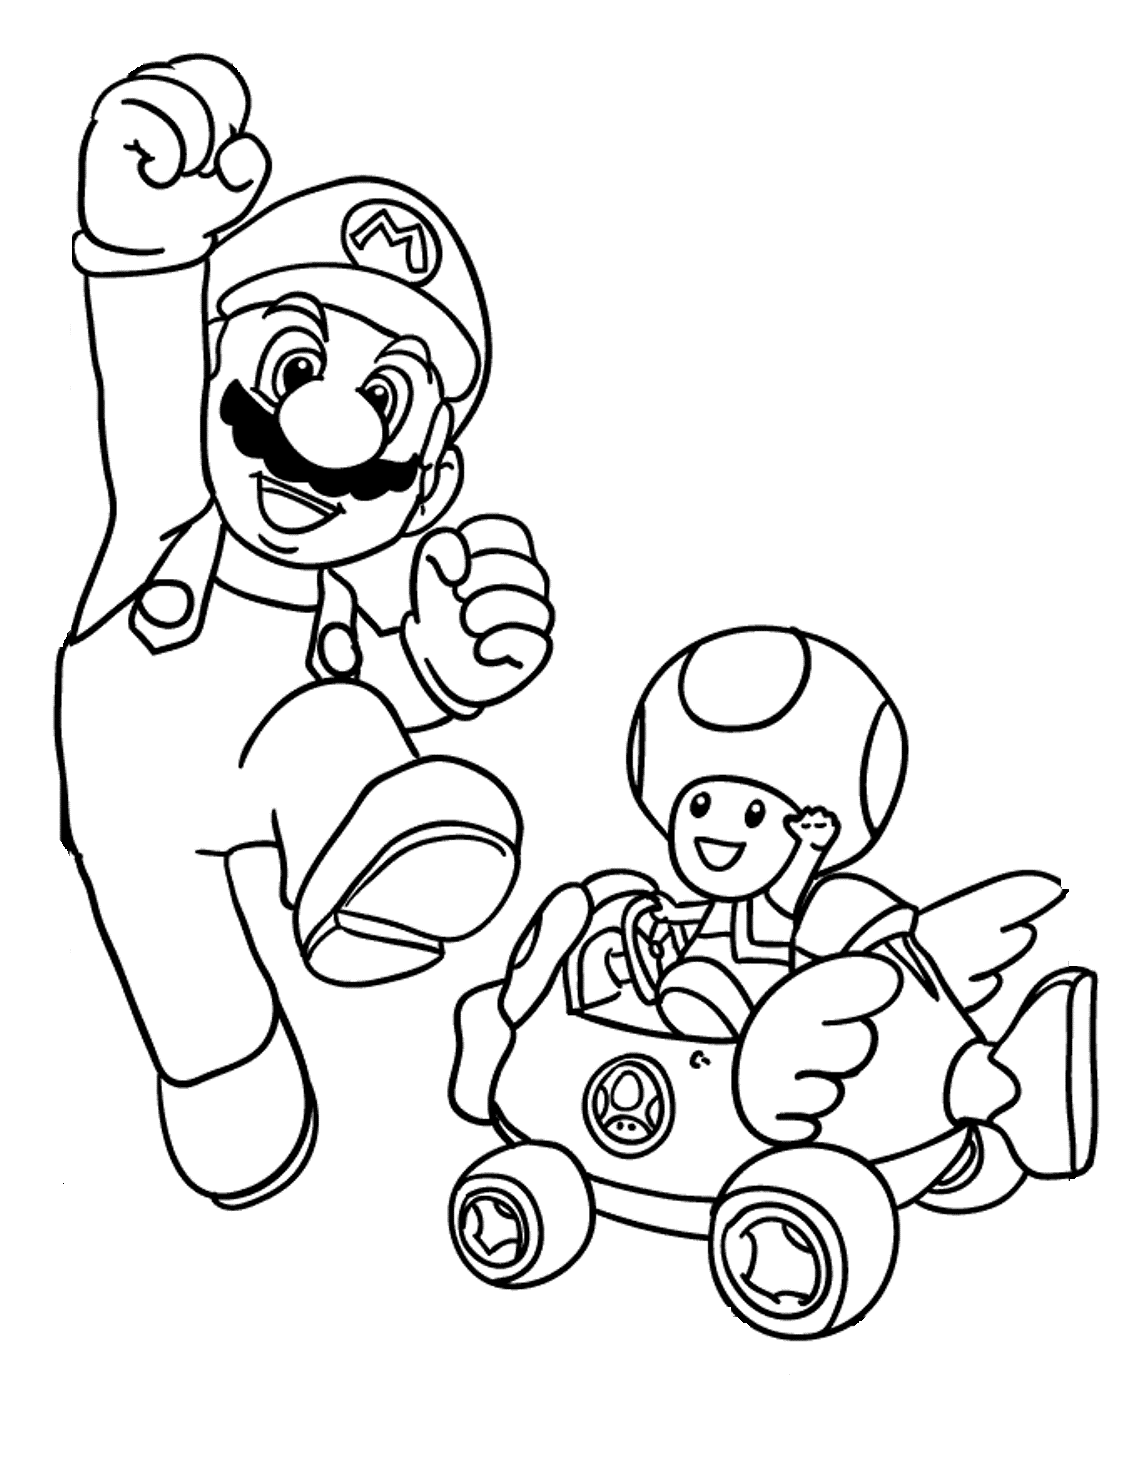 Sheenaowens: Super Mario Brothers Coloring Pages